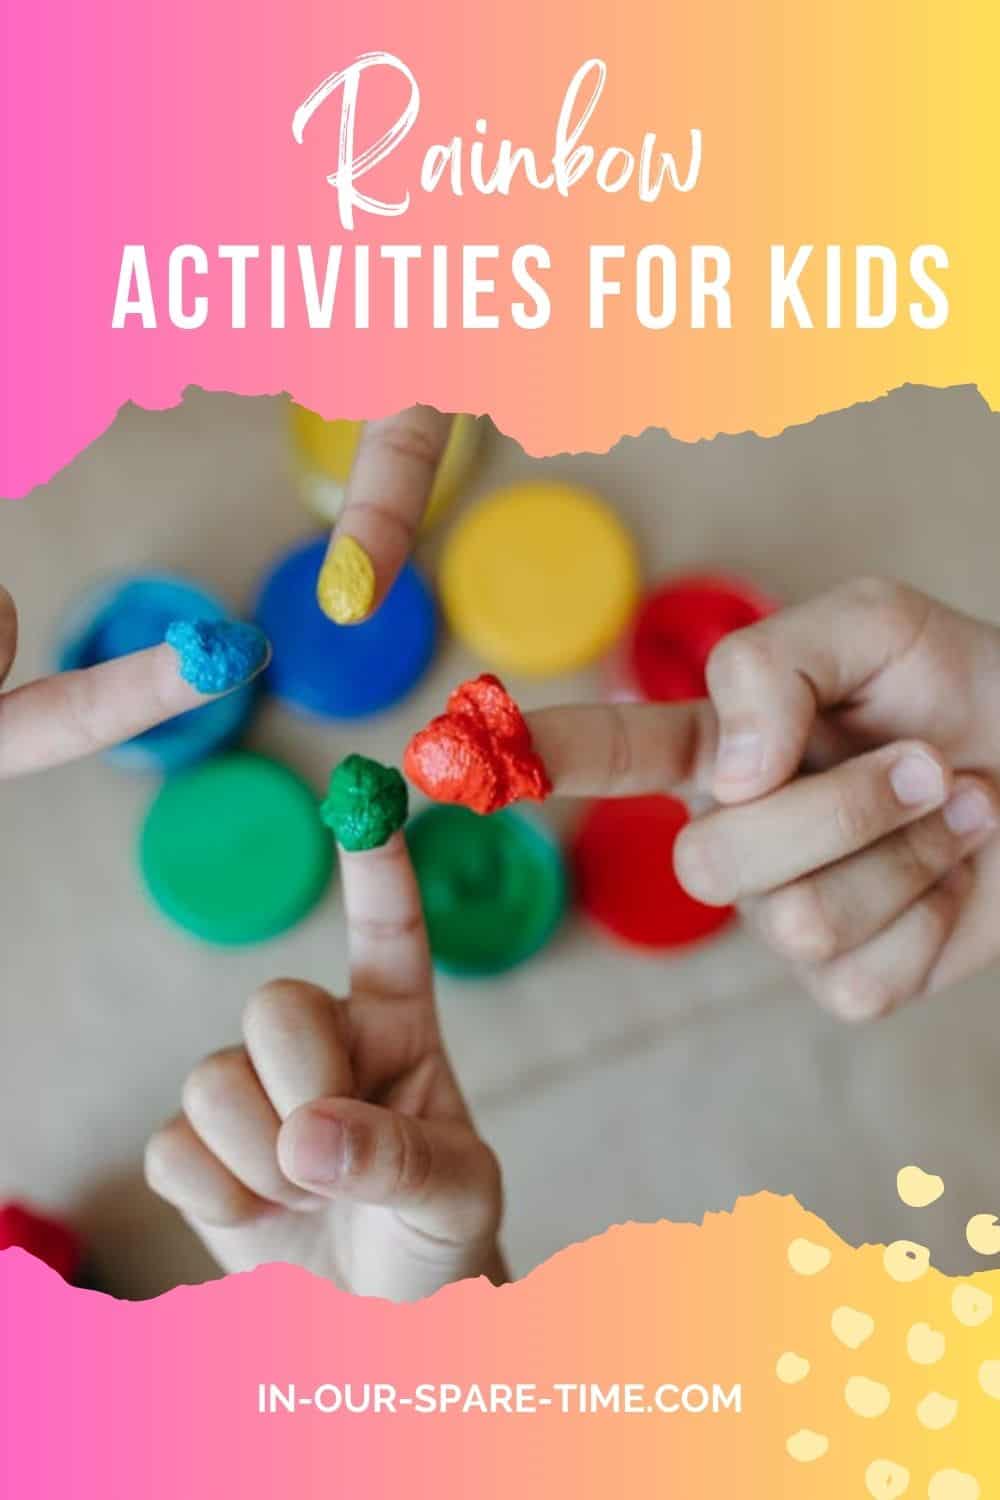 Wondering how to have fun with rainbows? Check out The Ultimate Guide to Making Rainbows a Blast for Kids for some ideas.